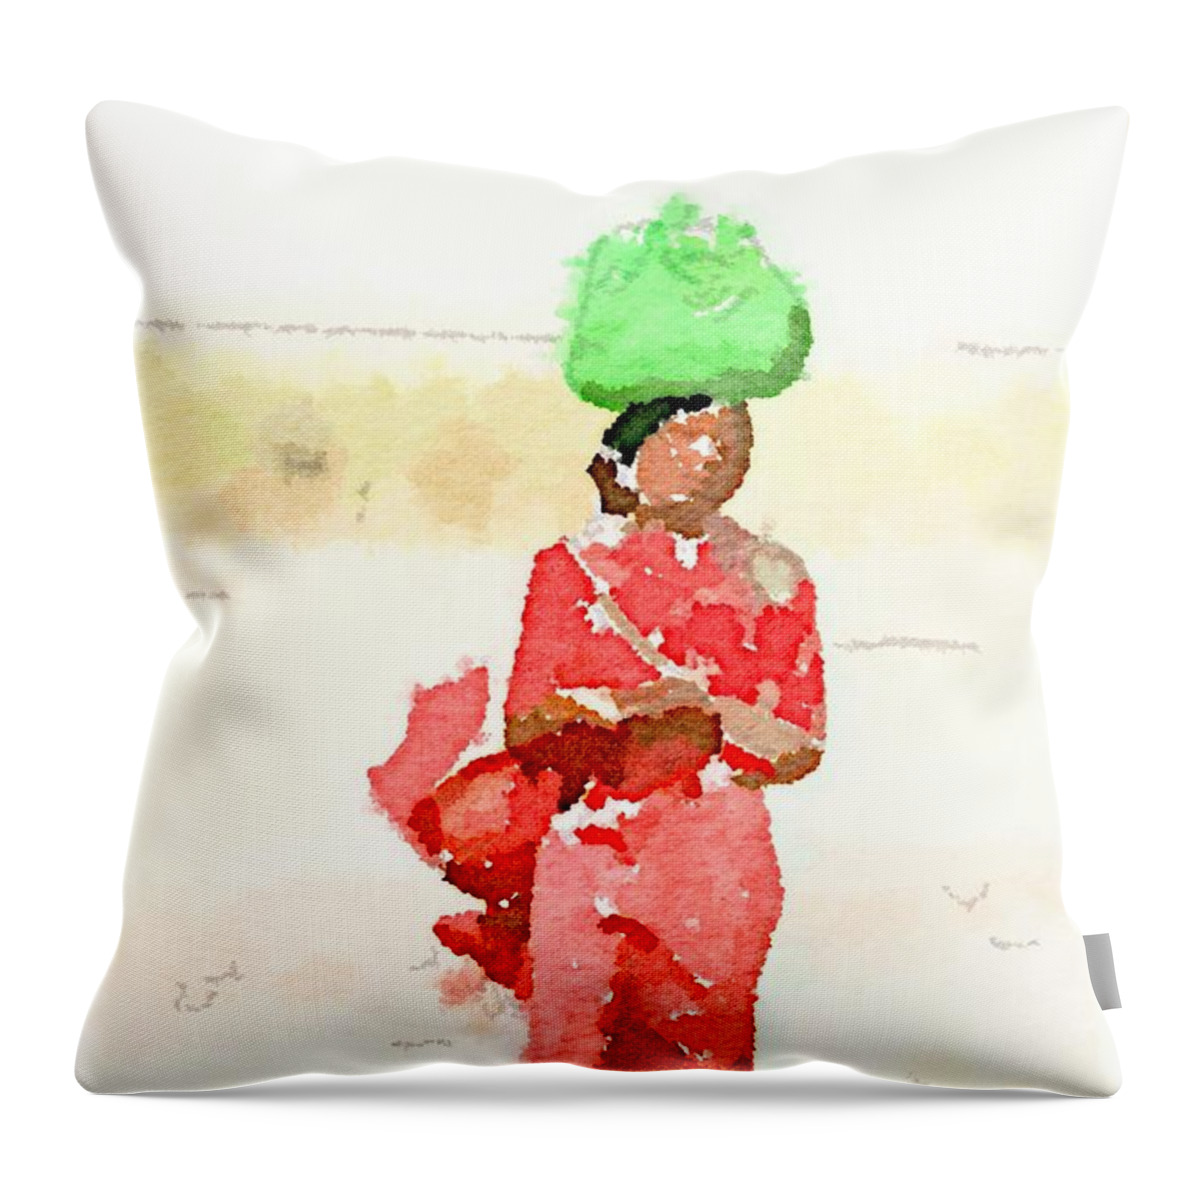 Woman Throw Pillow featuring the painting Woman Bag by HELGE Art Gallery